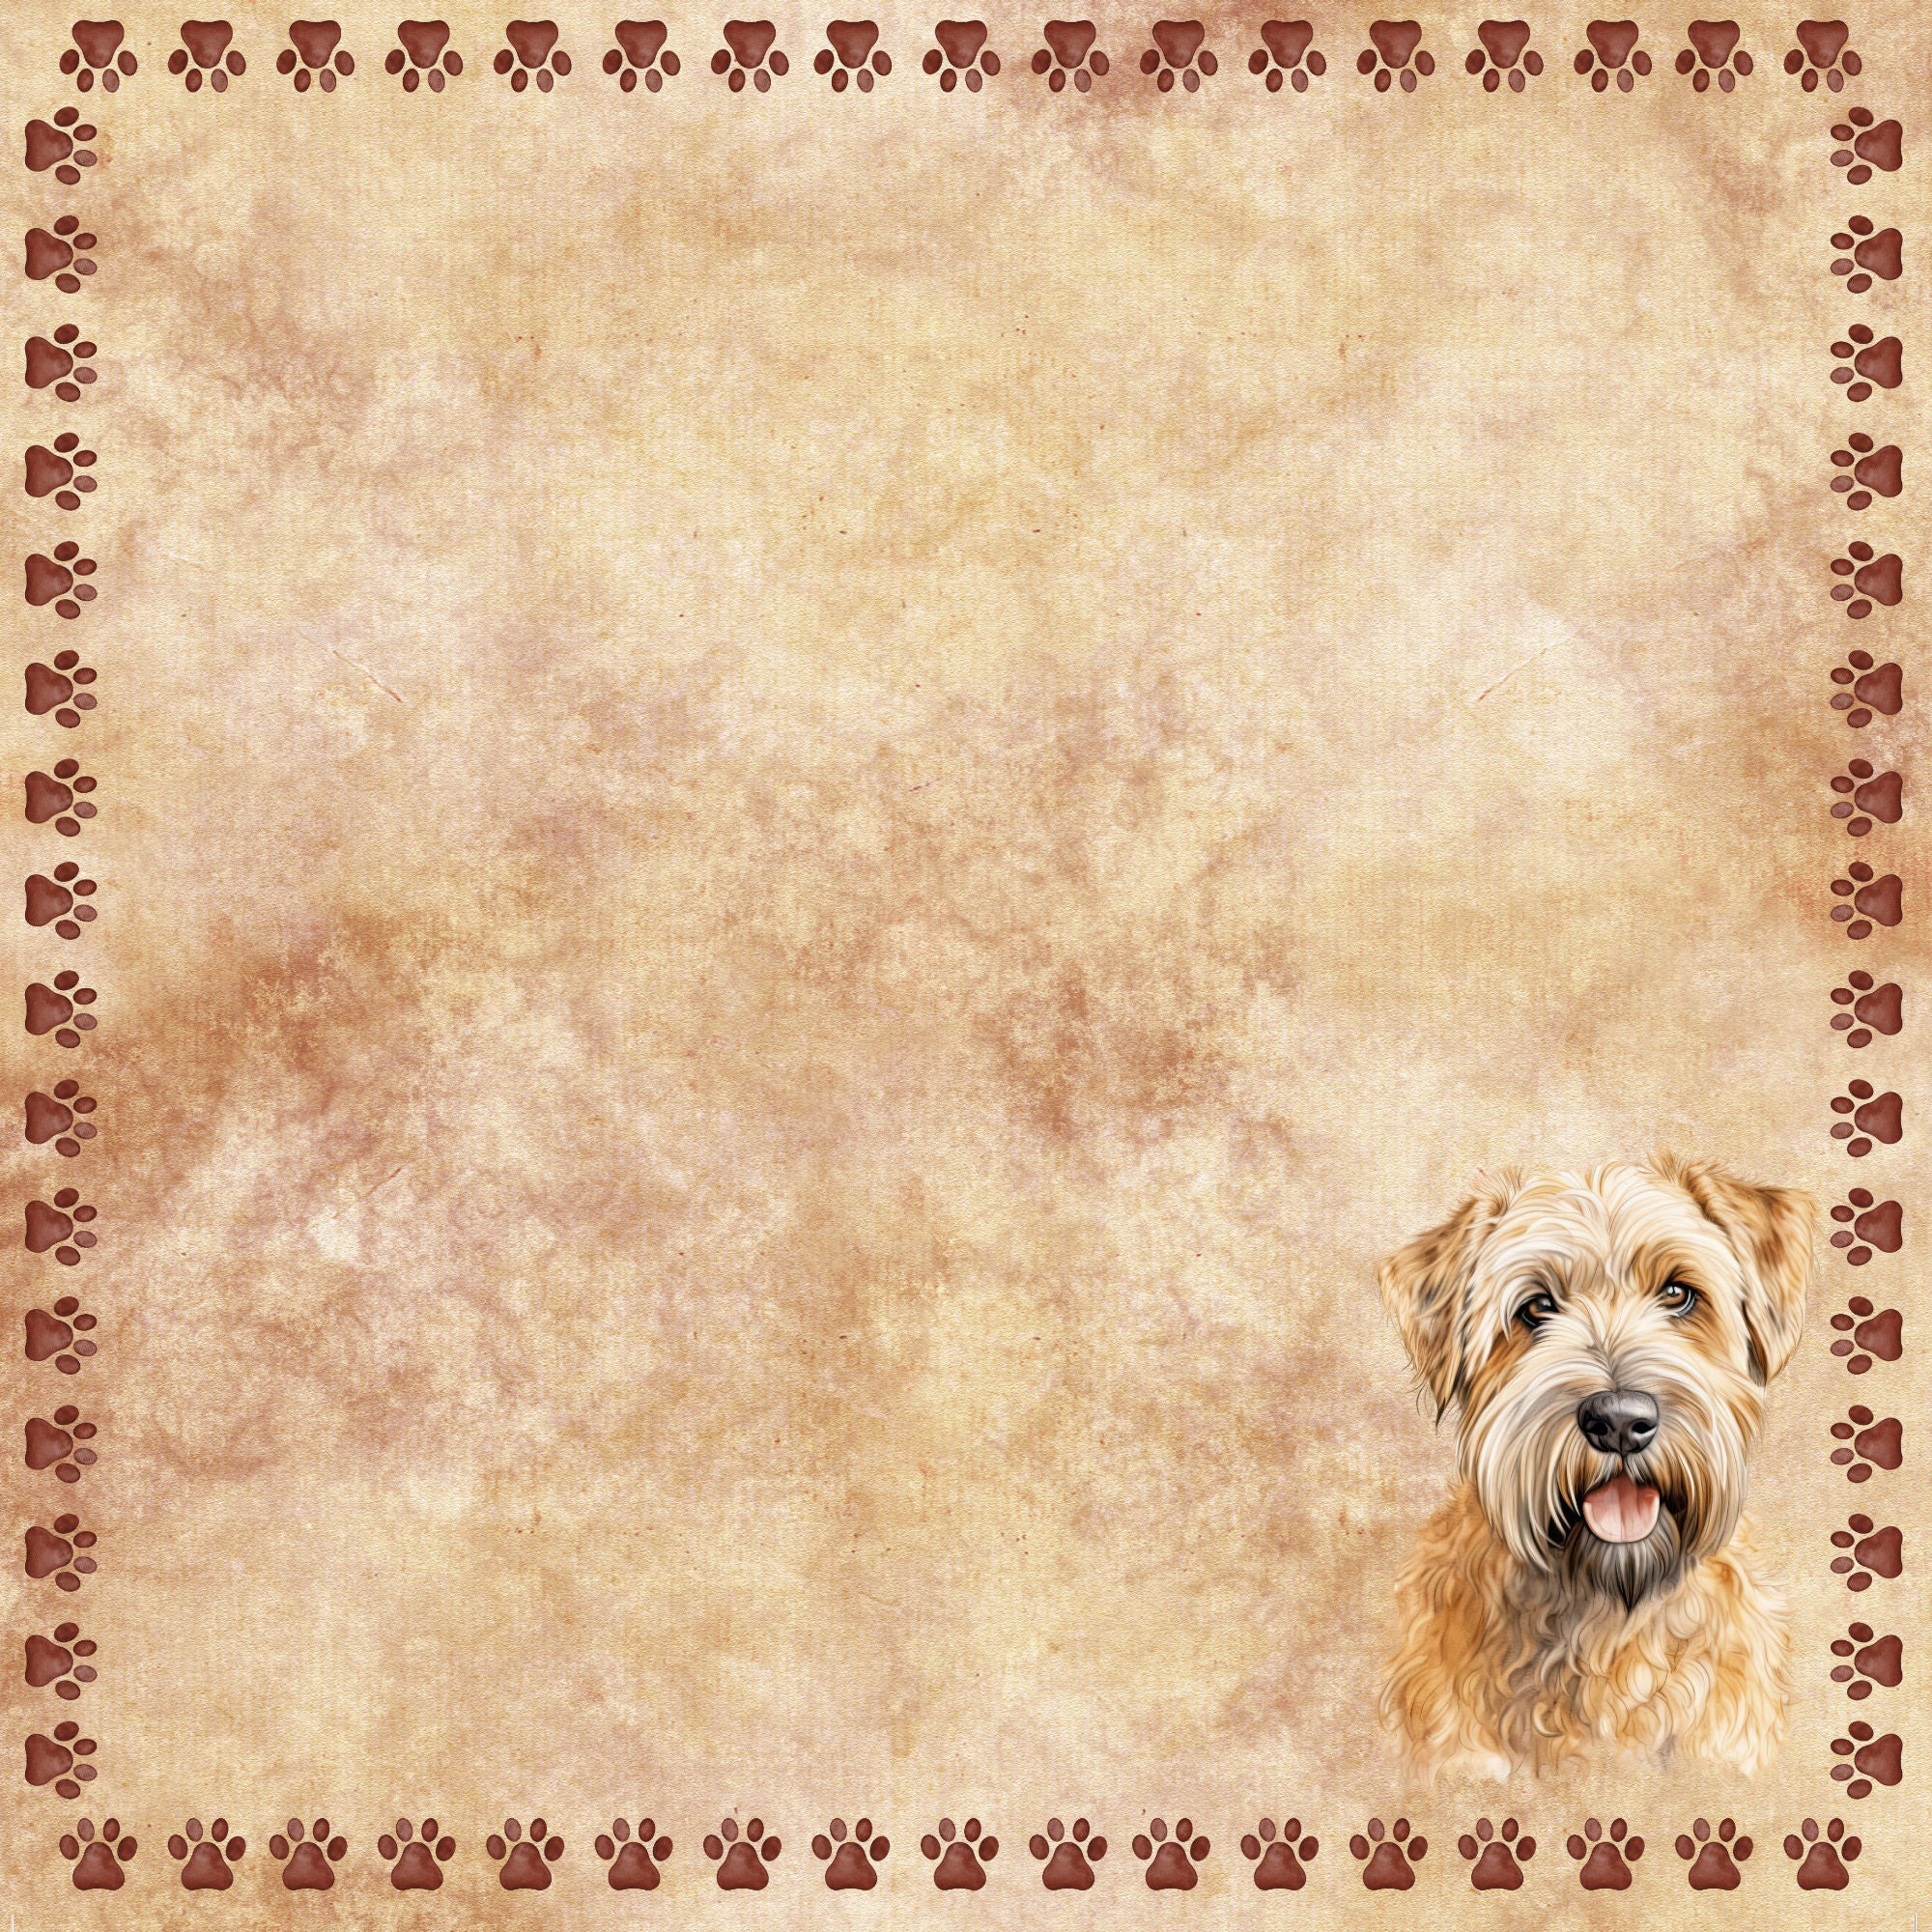 Dog Breeds Collection Wheaten Terrier 12 x 12 Double-Sided Scrapbook Paper by SSC Designs